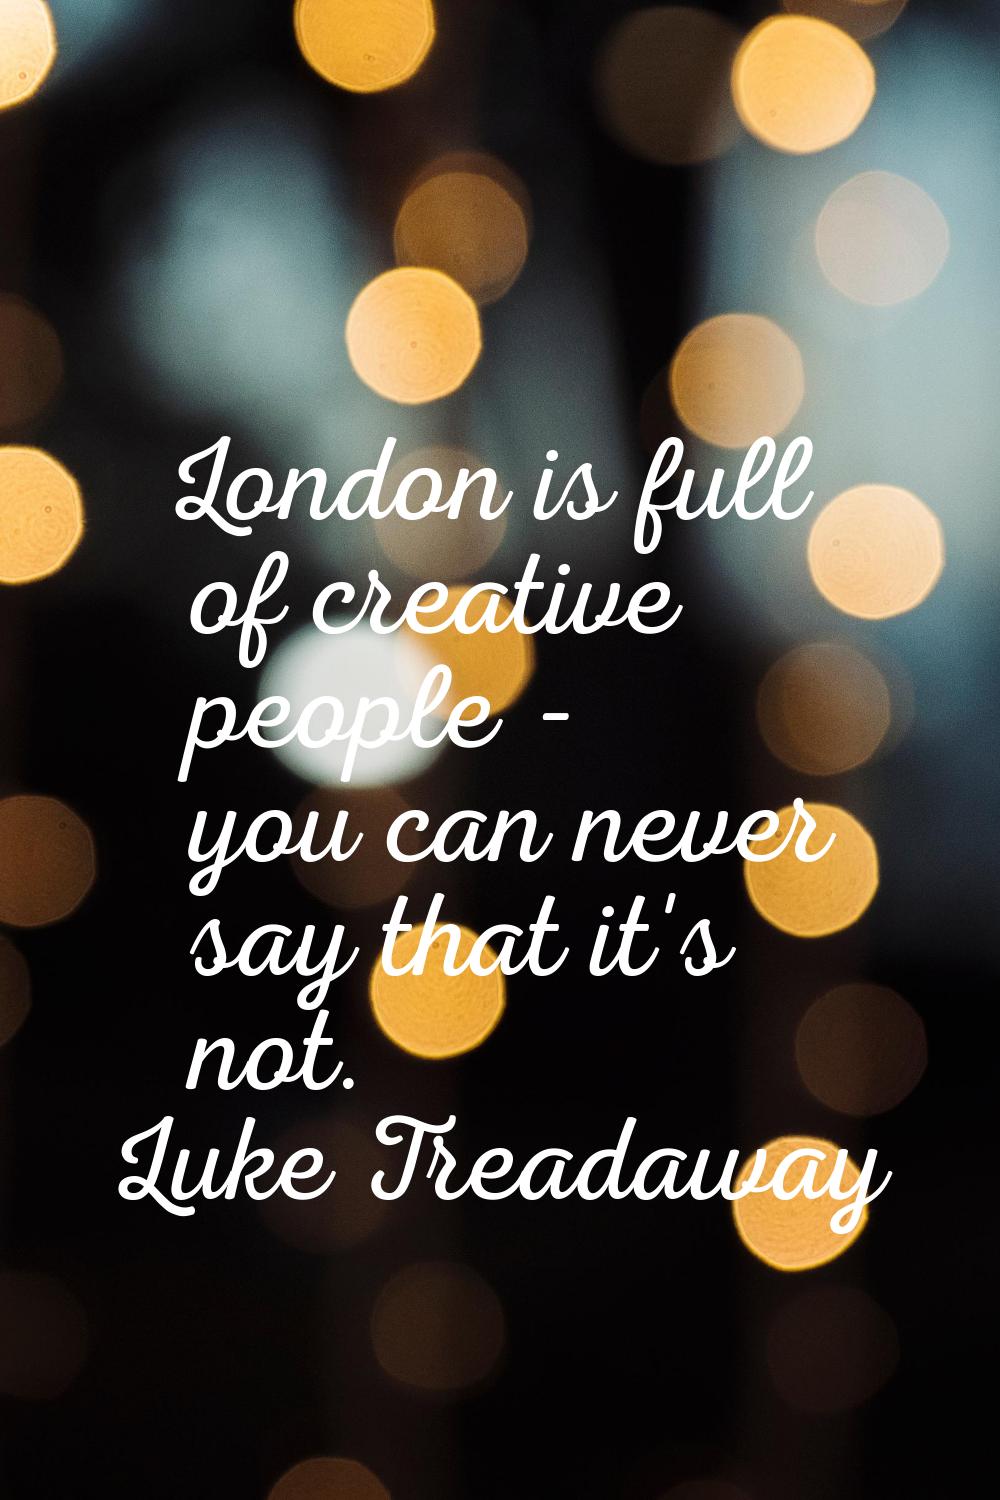 London is full of creative people - you can never say that it's not.